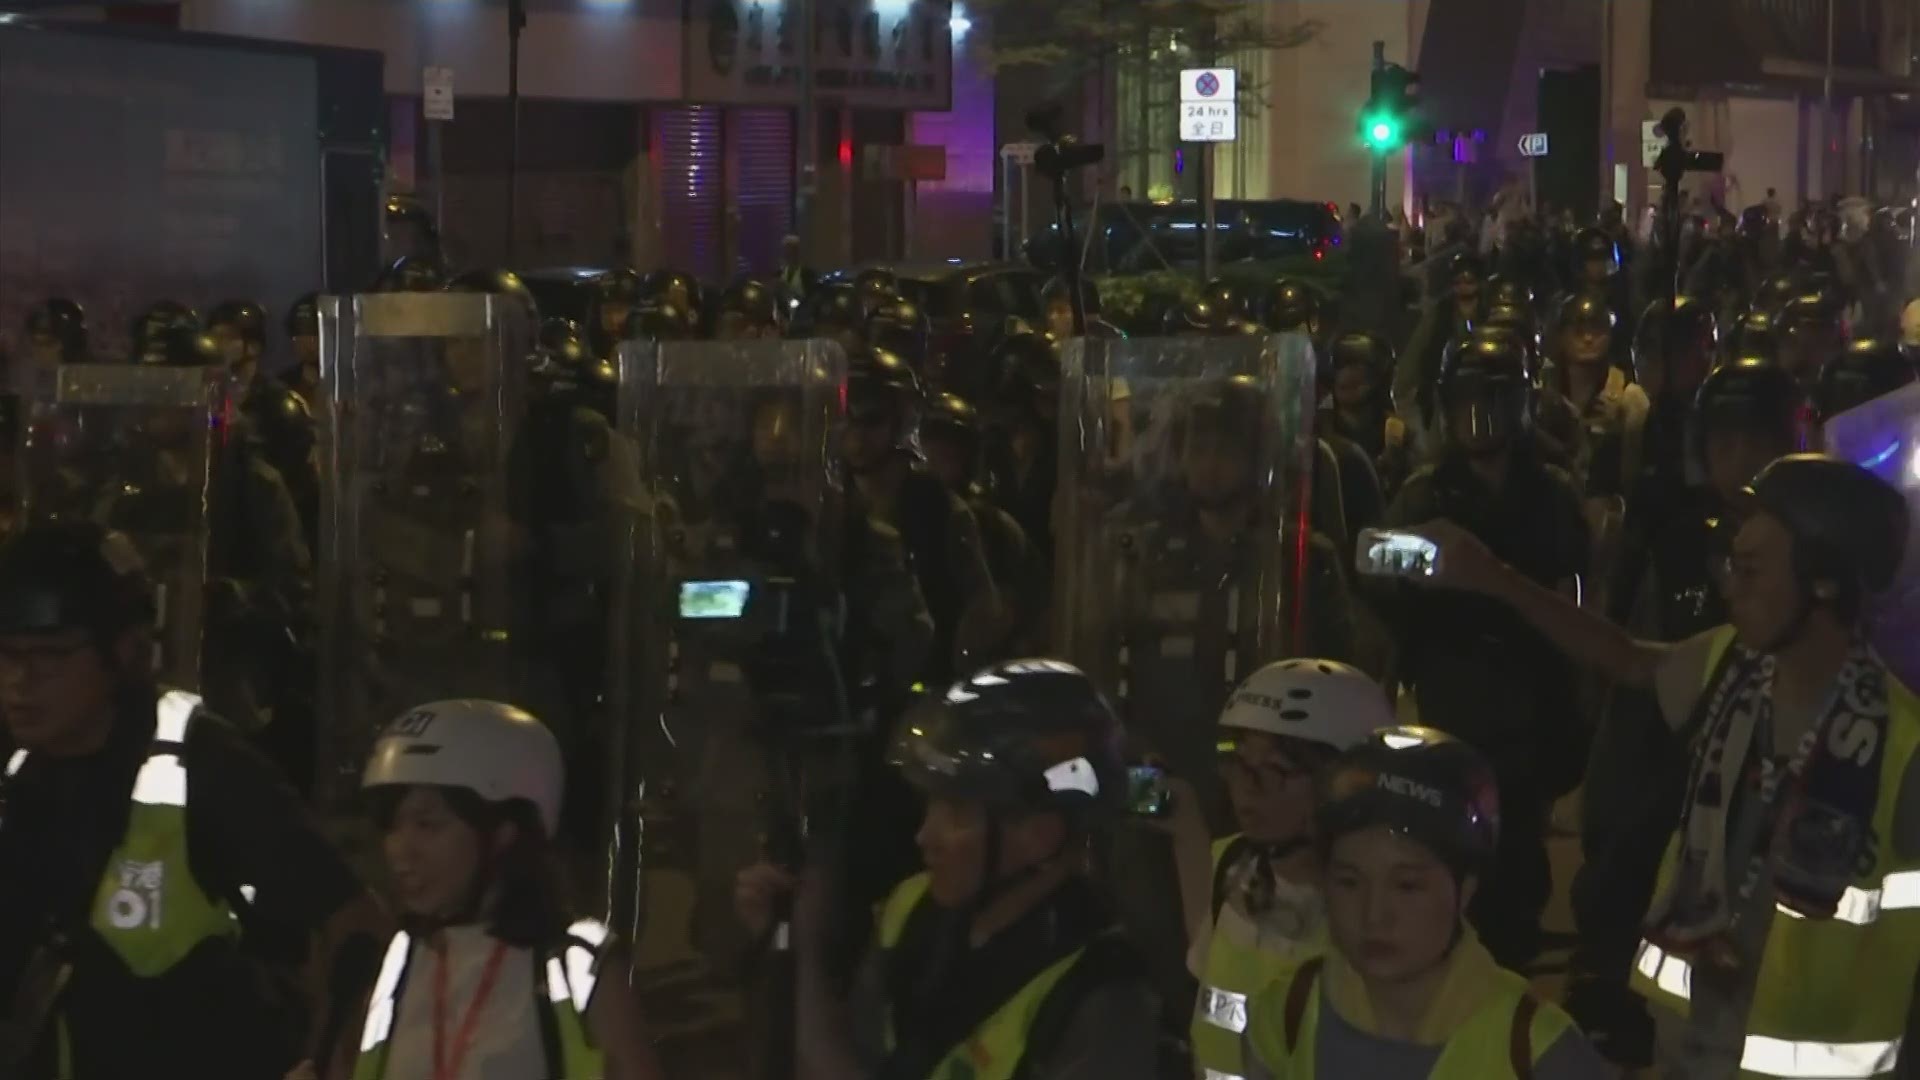 Police lined up on Kong Kong's streets on Sunday as tens of thousands marched in another anti-government demonstration, this time principally calling for an independent investigation into police tactics used during previous protests.